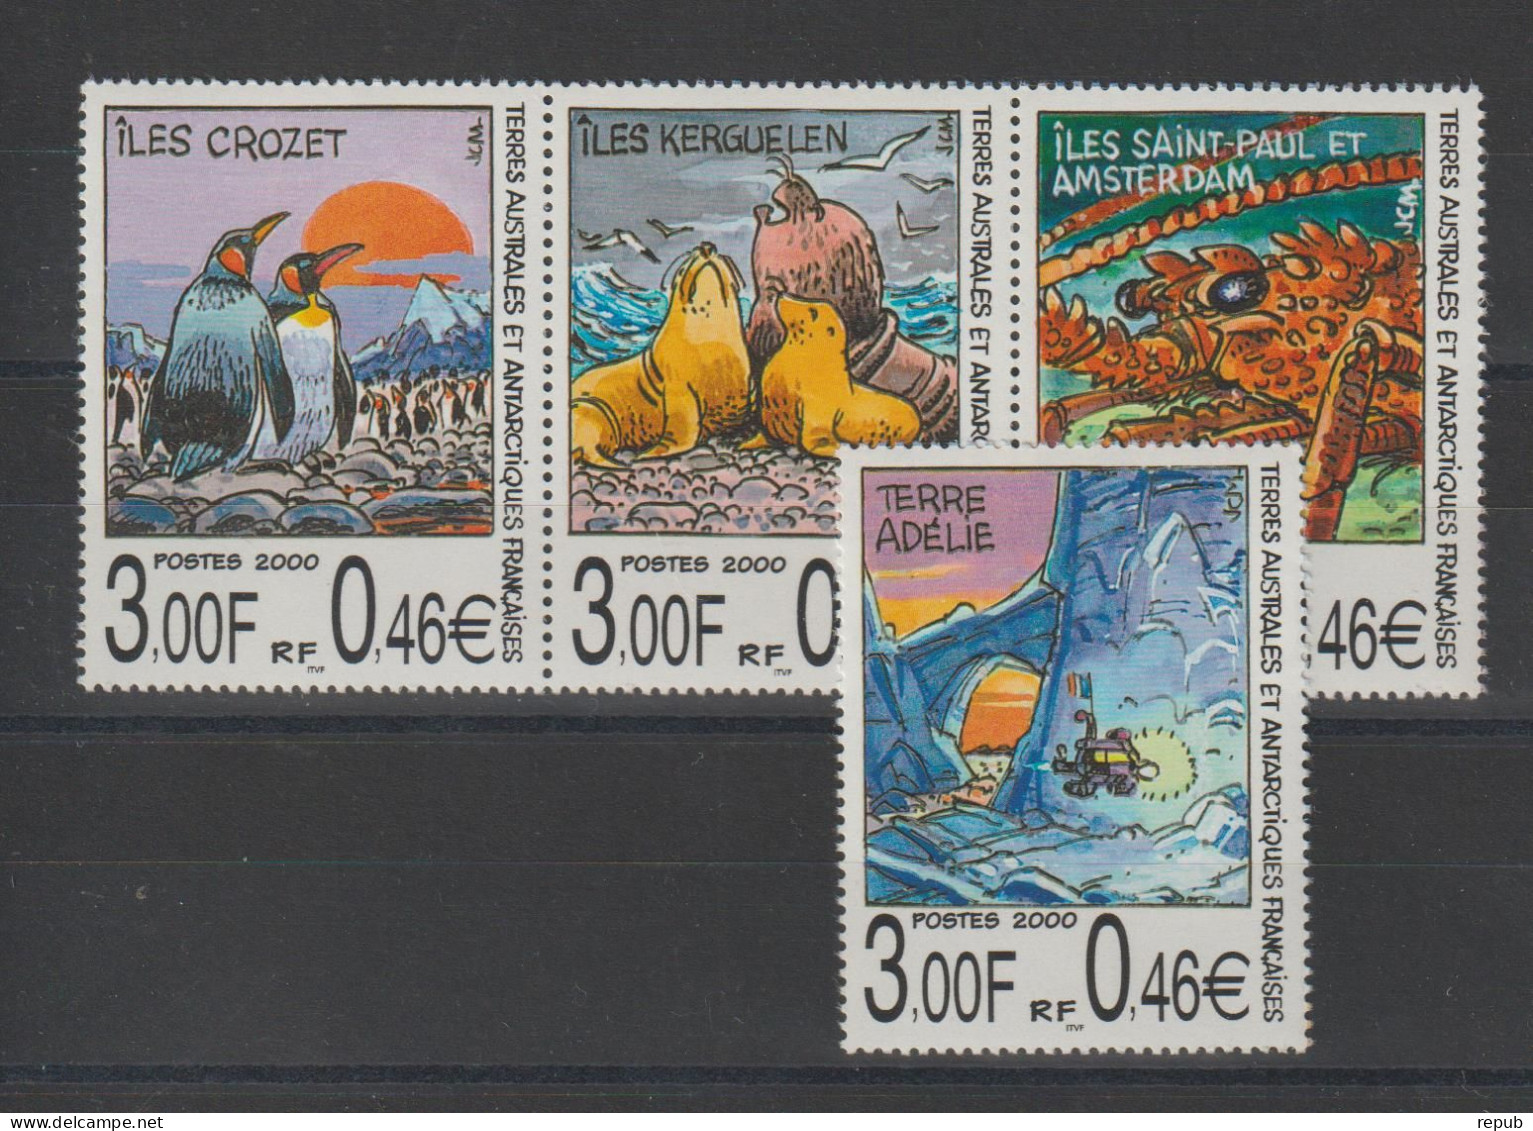 TAAF 2000 Timbres Issus Du BF 4, 281-284, 4 Val ** MNH - Ungebraucht